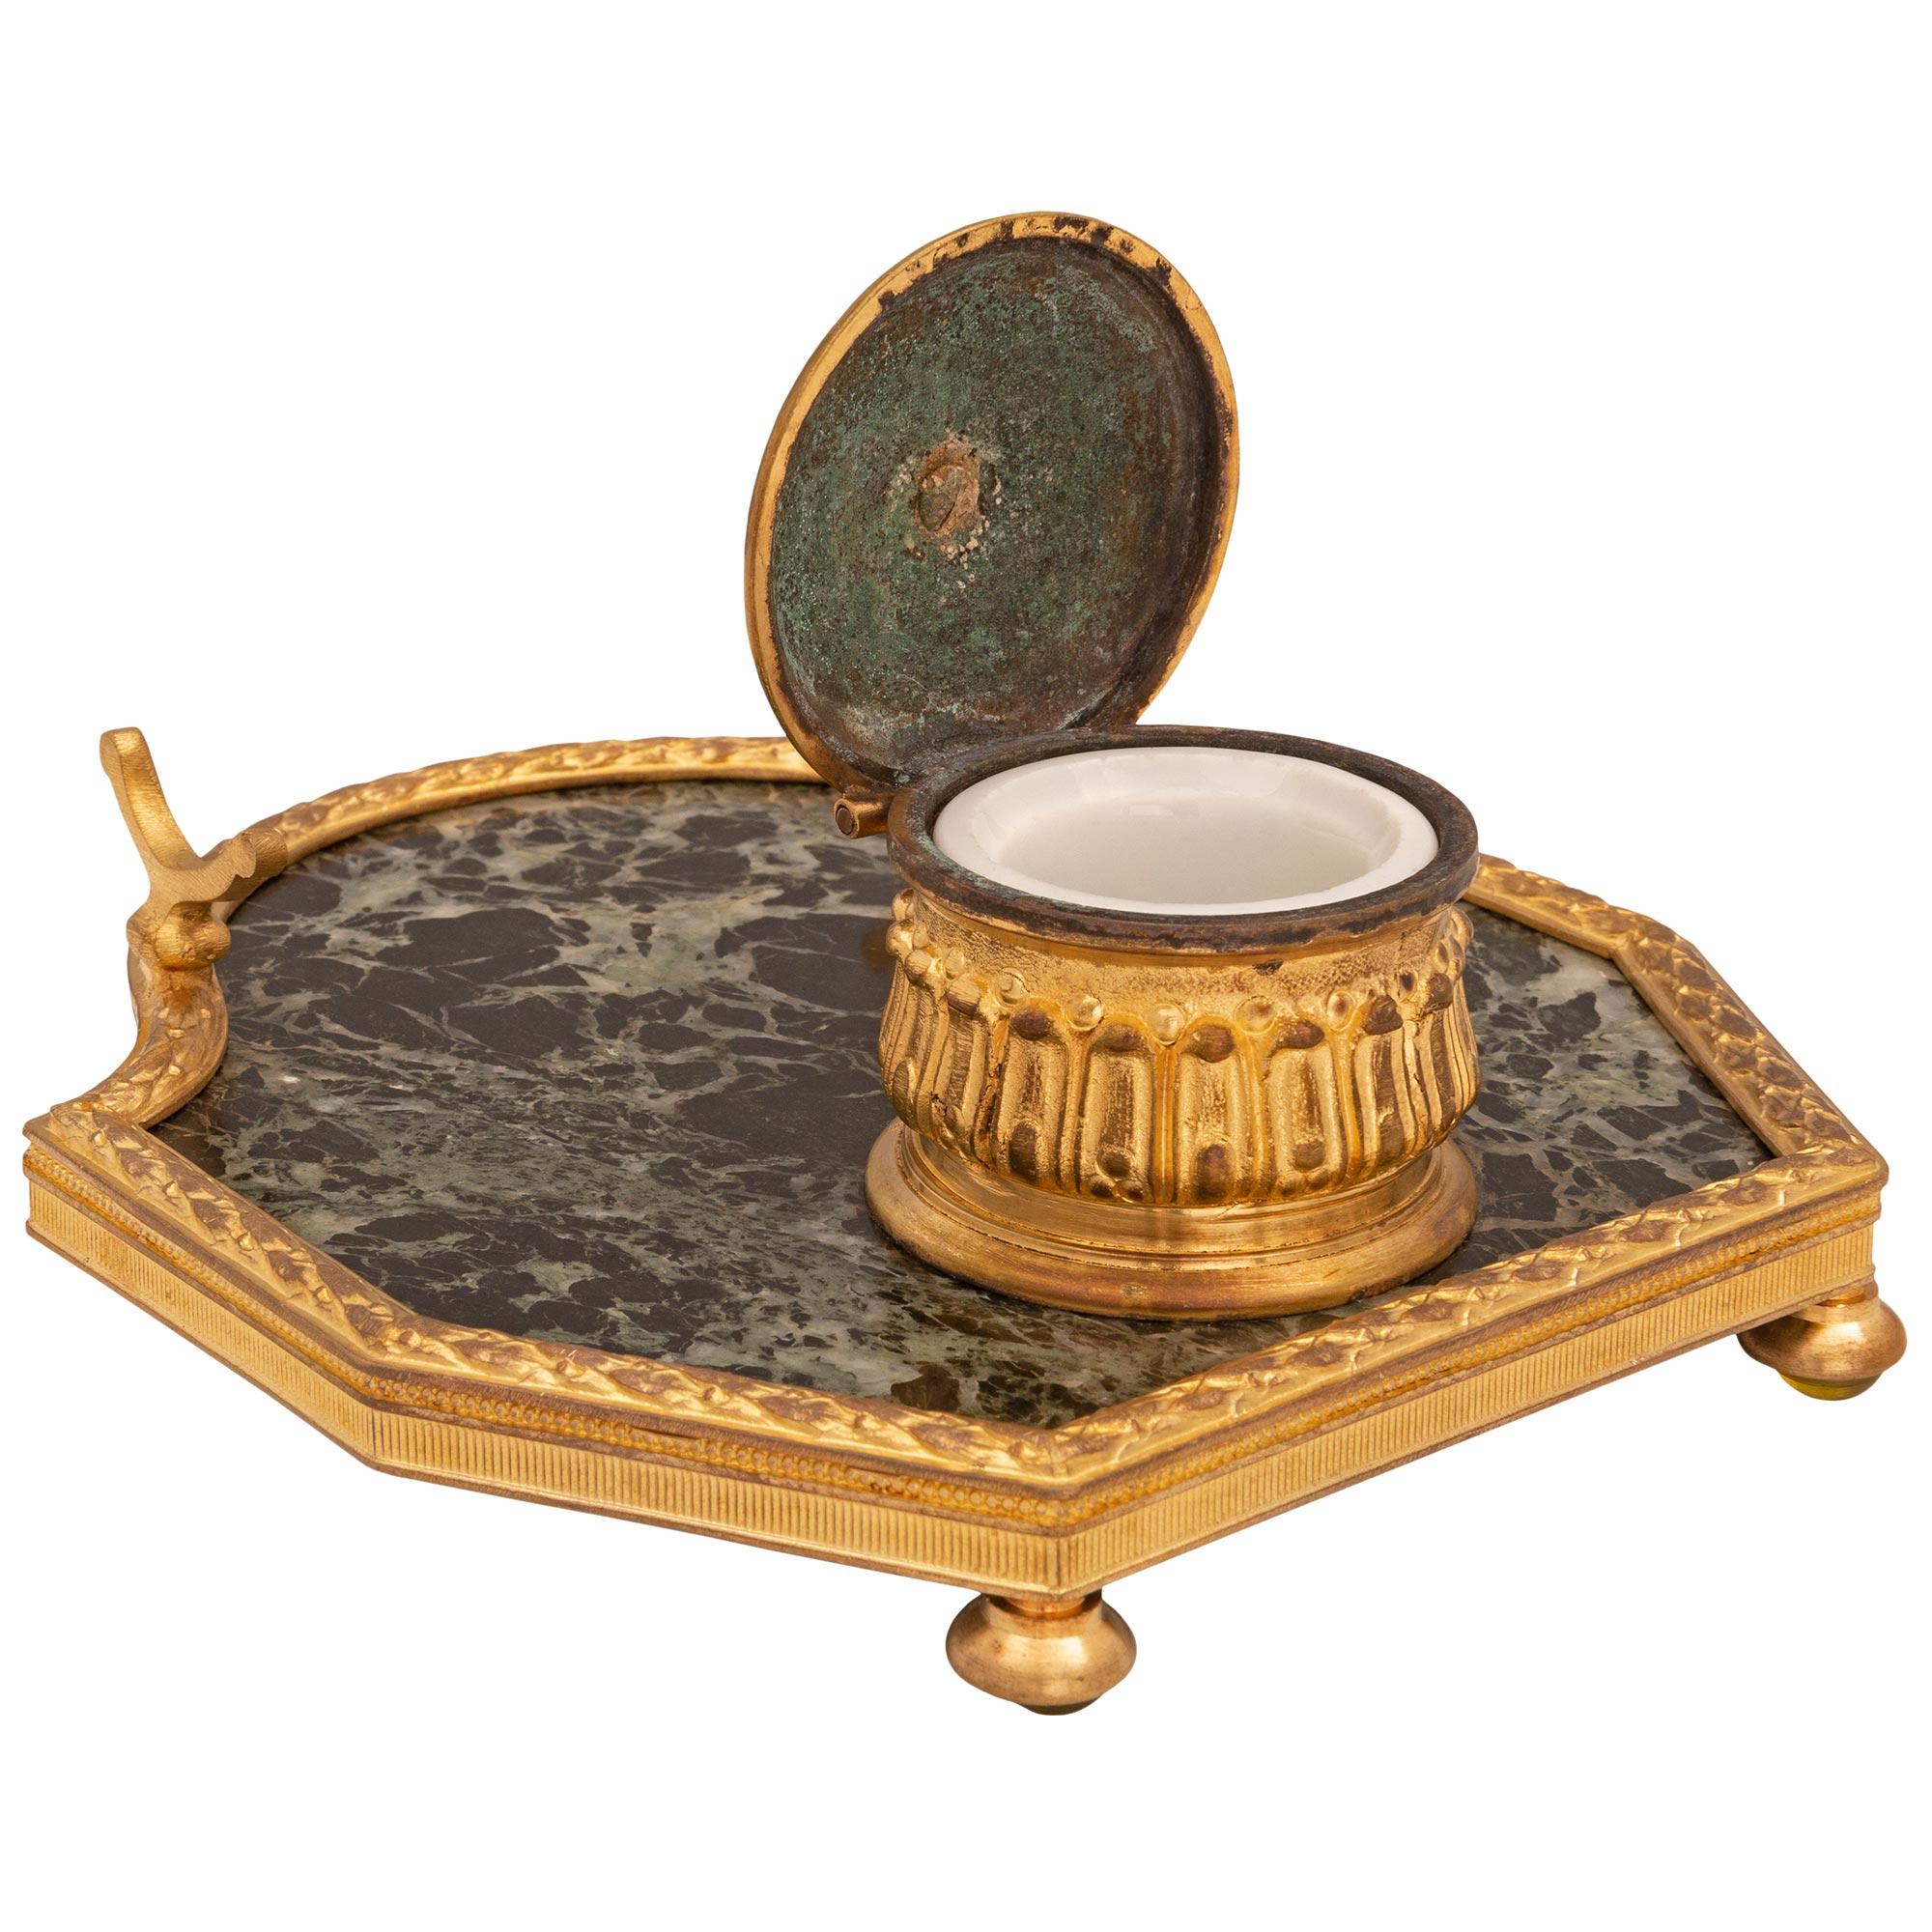 French Mid-19th Century Louis XVI Style Green Marble and Ormolu Mounted Inkwell For Sale 1